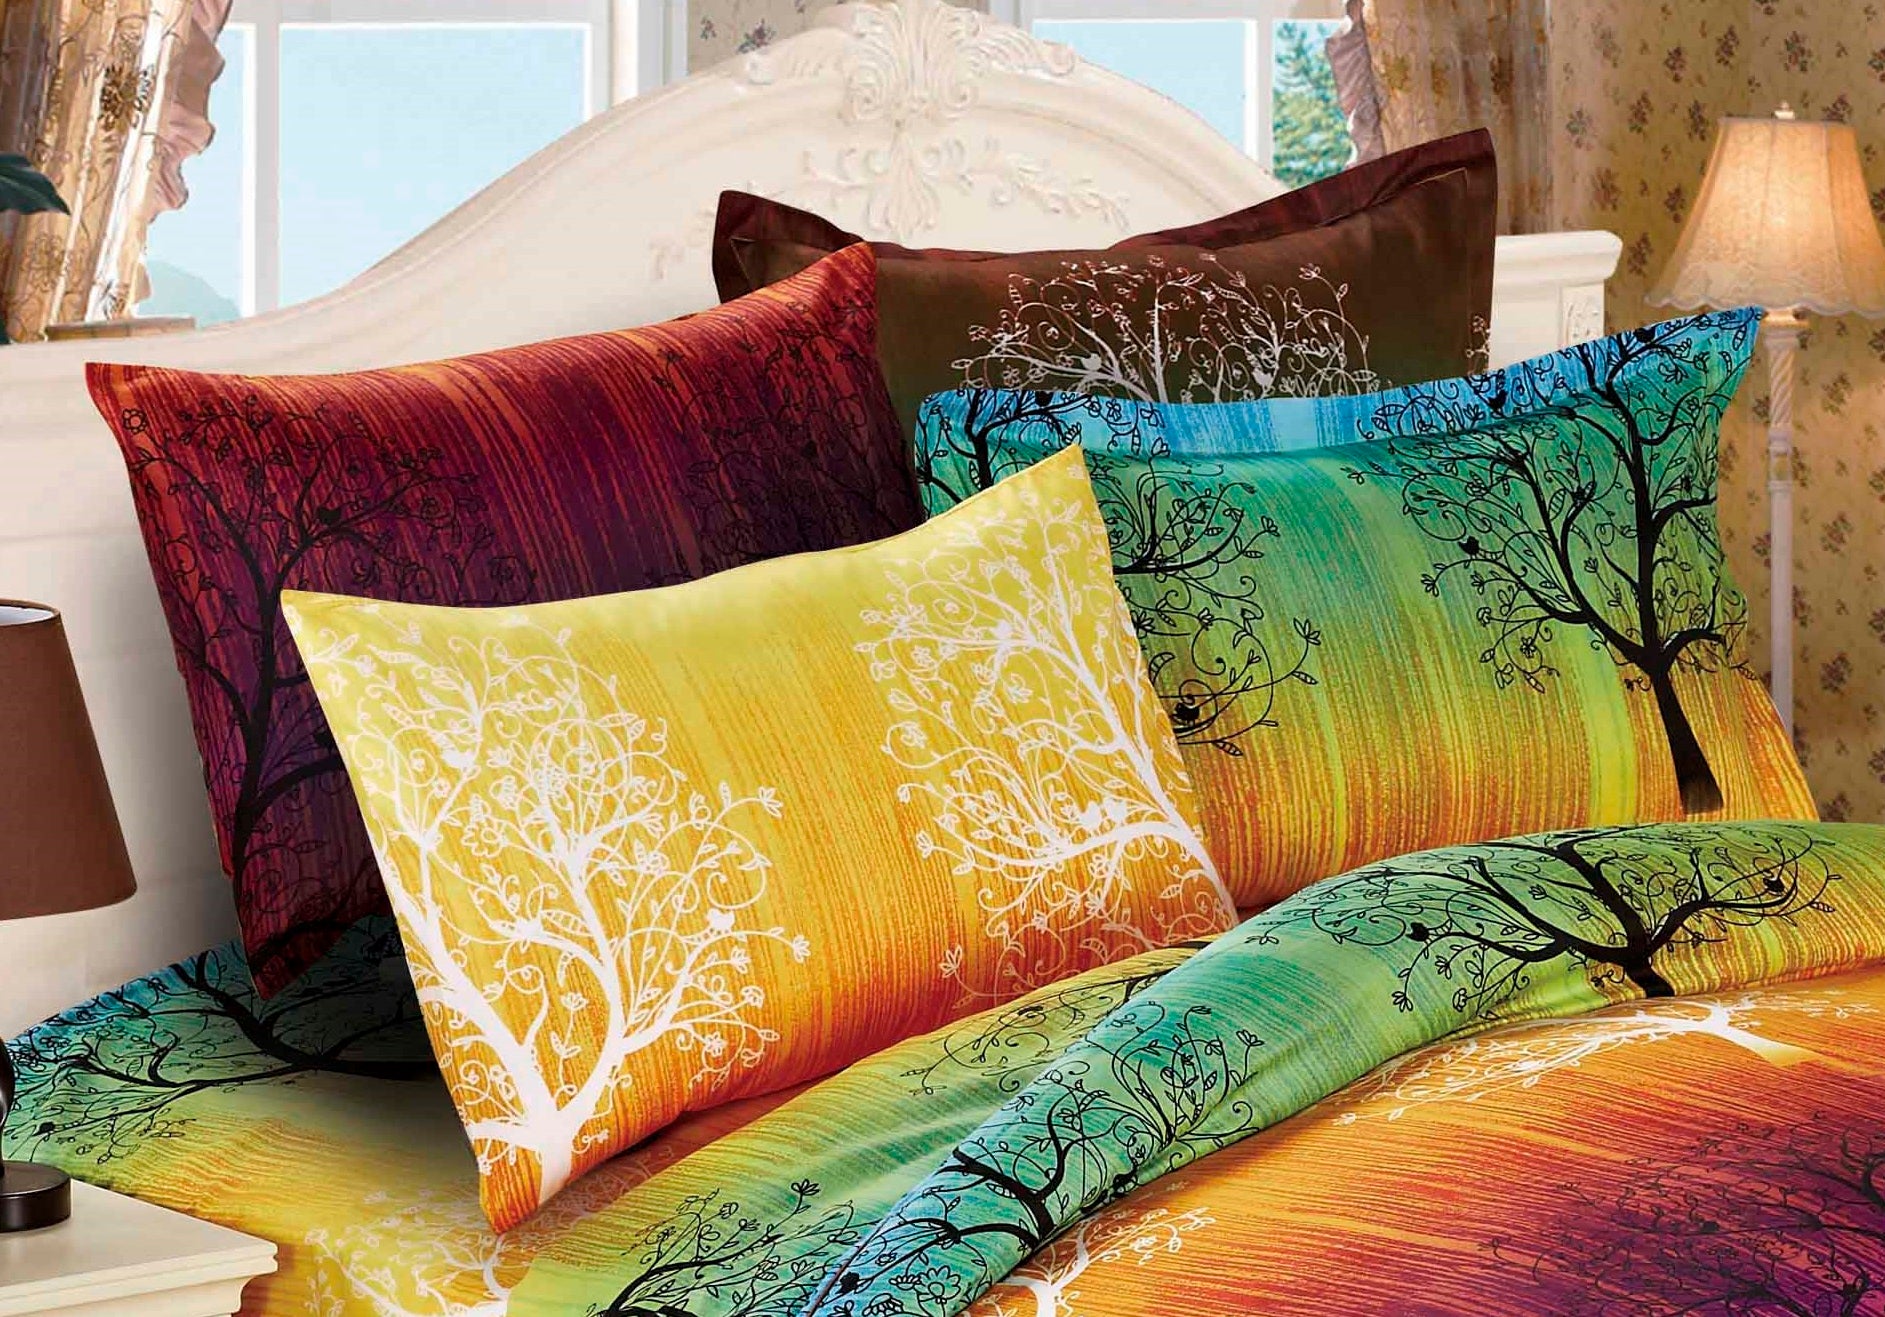 Rainbow Tree 5 Piece Duvet Cover Set: Duvet Cover, Two Matching Pillowcases and Two Pillow Shams